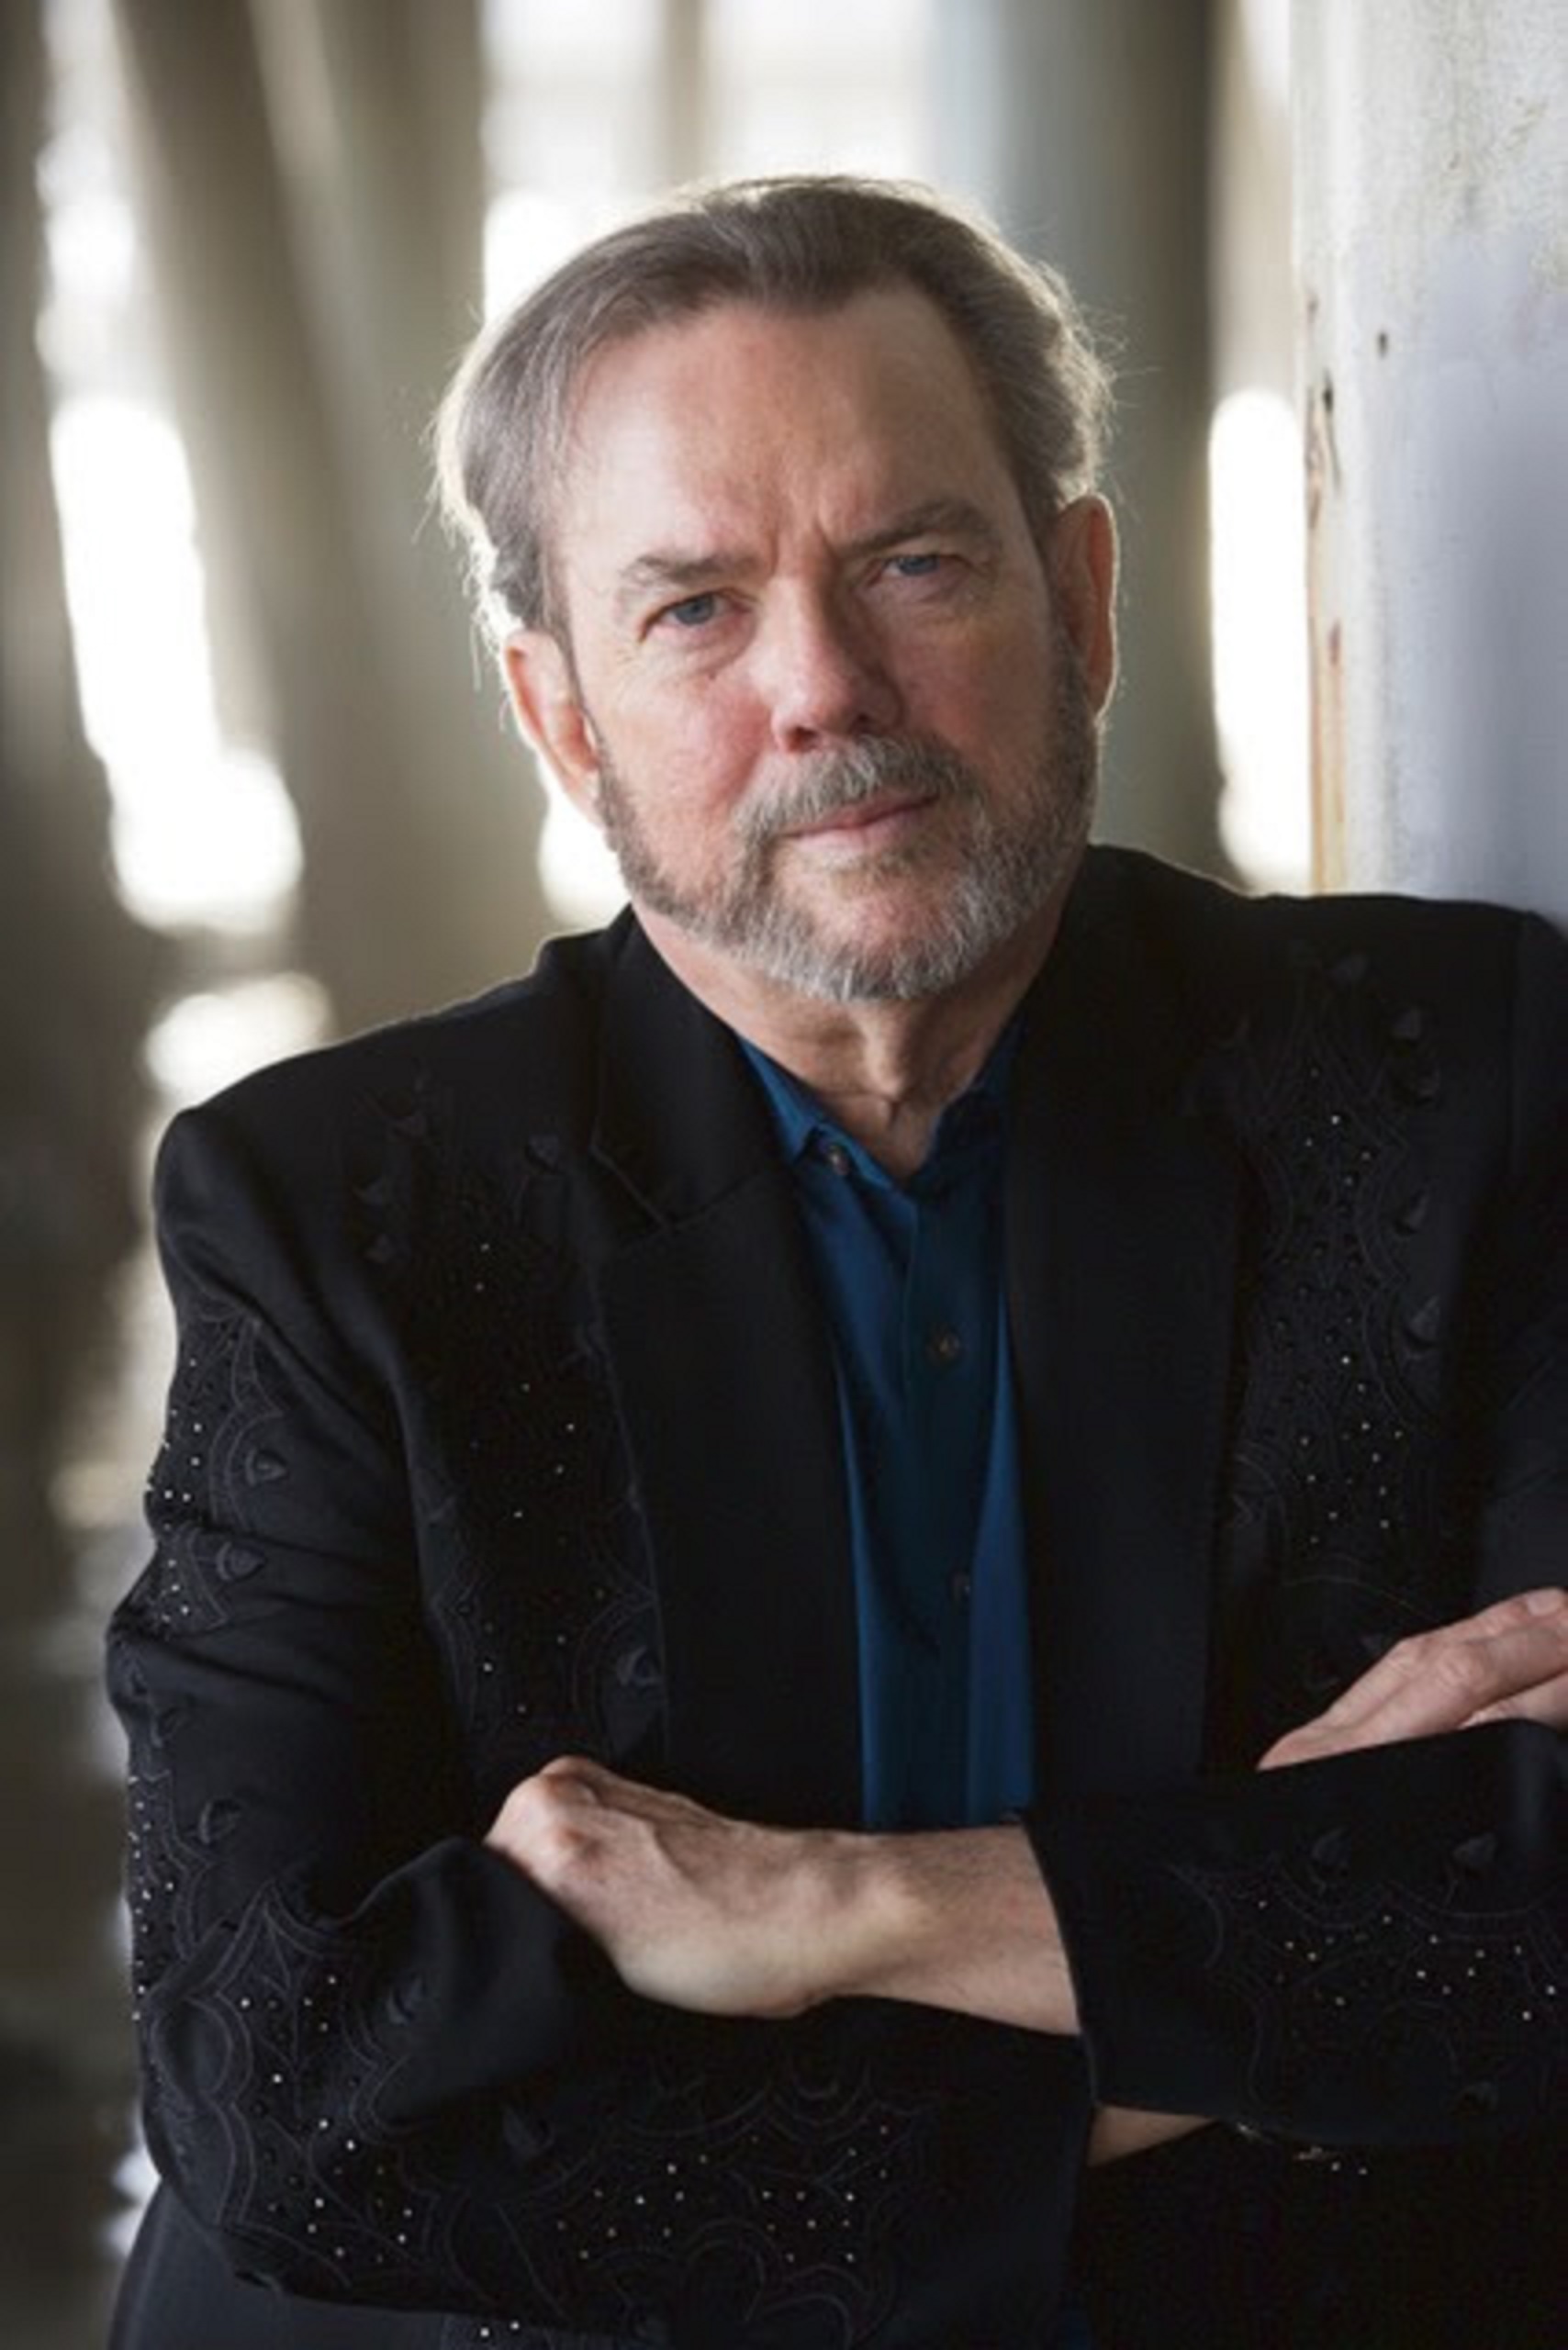 JIMMY WEBB to receive the Lifetime Achievement Award at the 37th Annual Bistro Awards